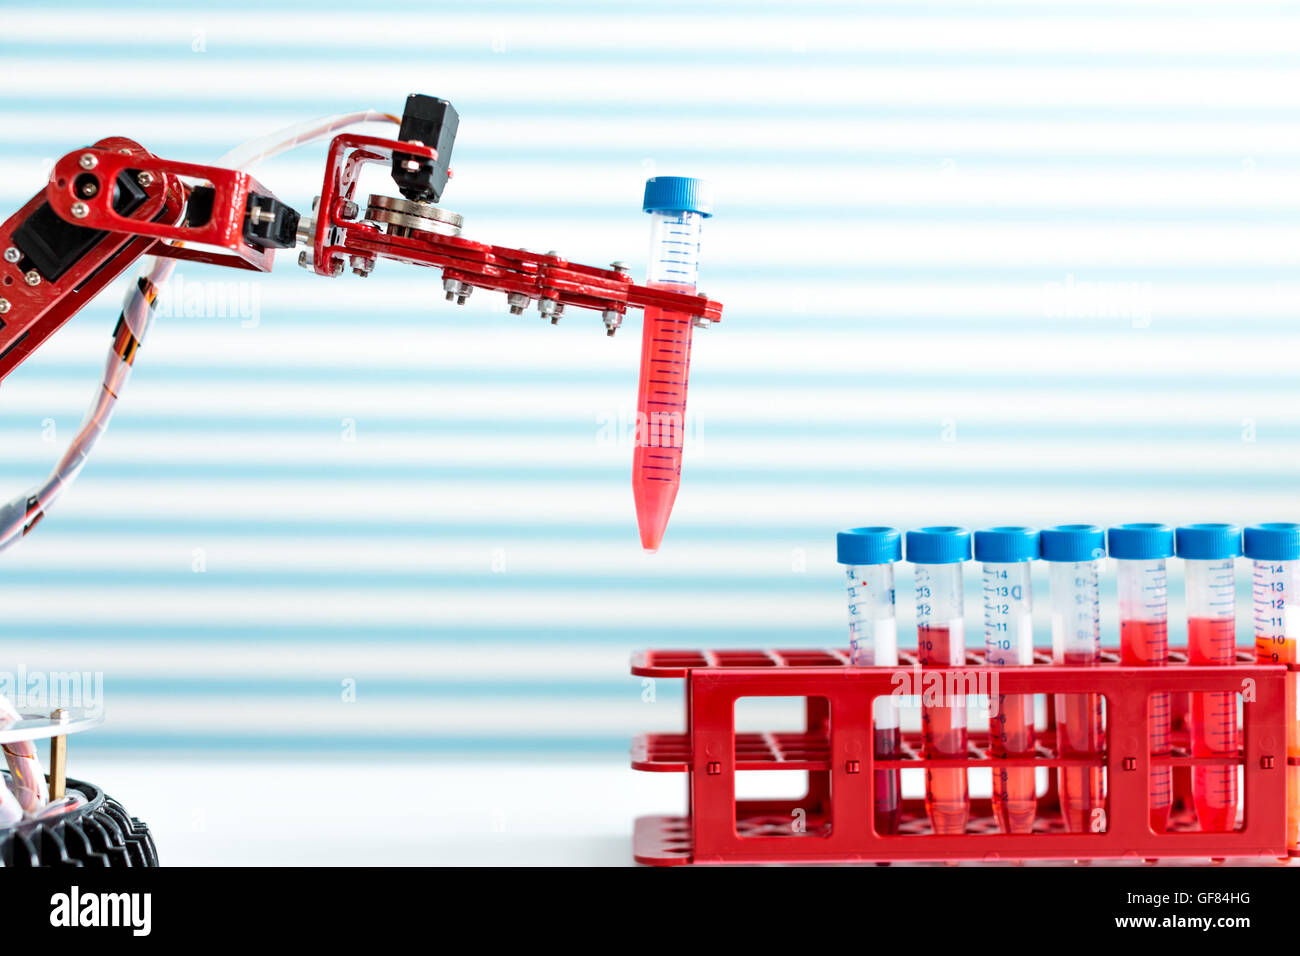 robot manipulates test tubes with dangerous chemicals Stock Photo